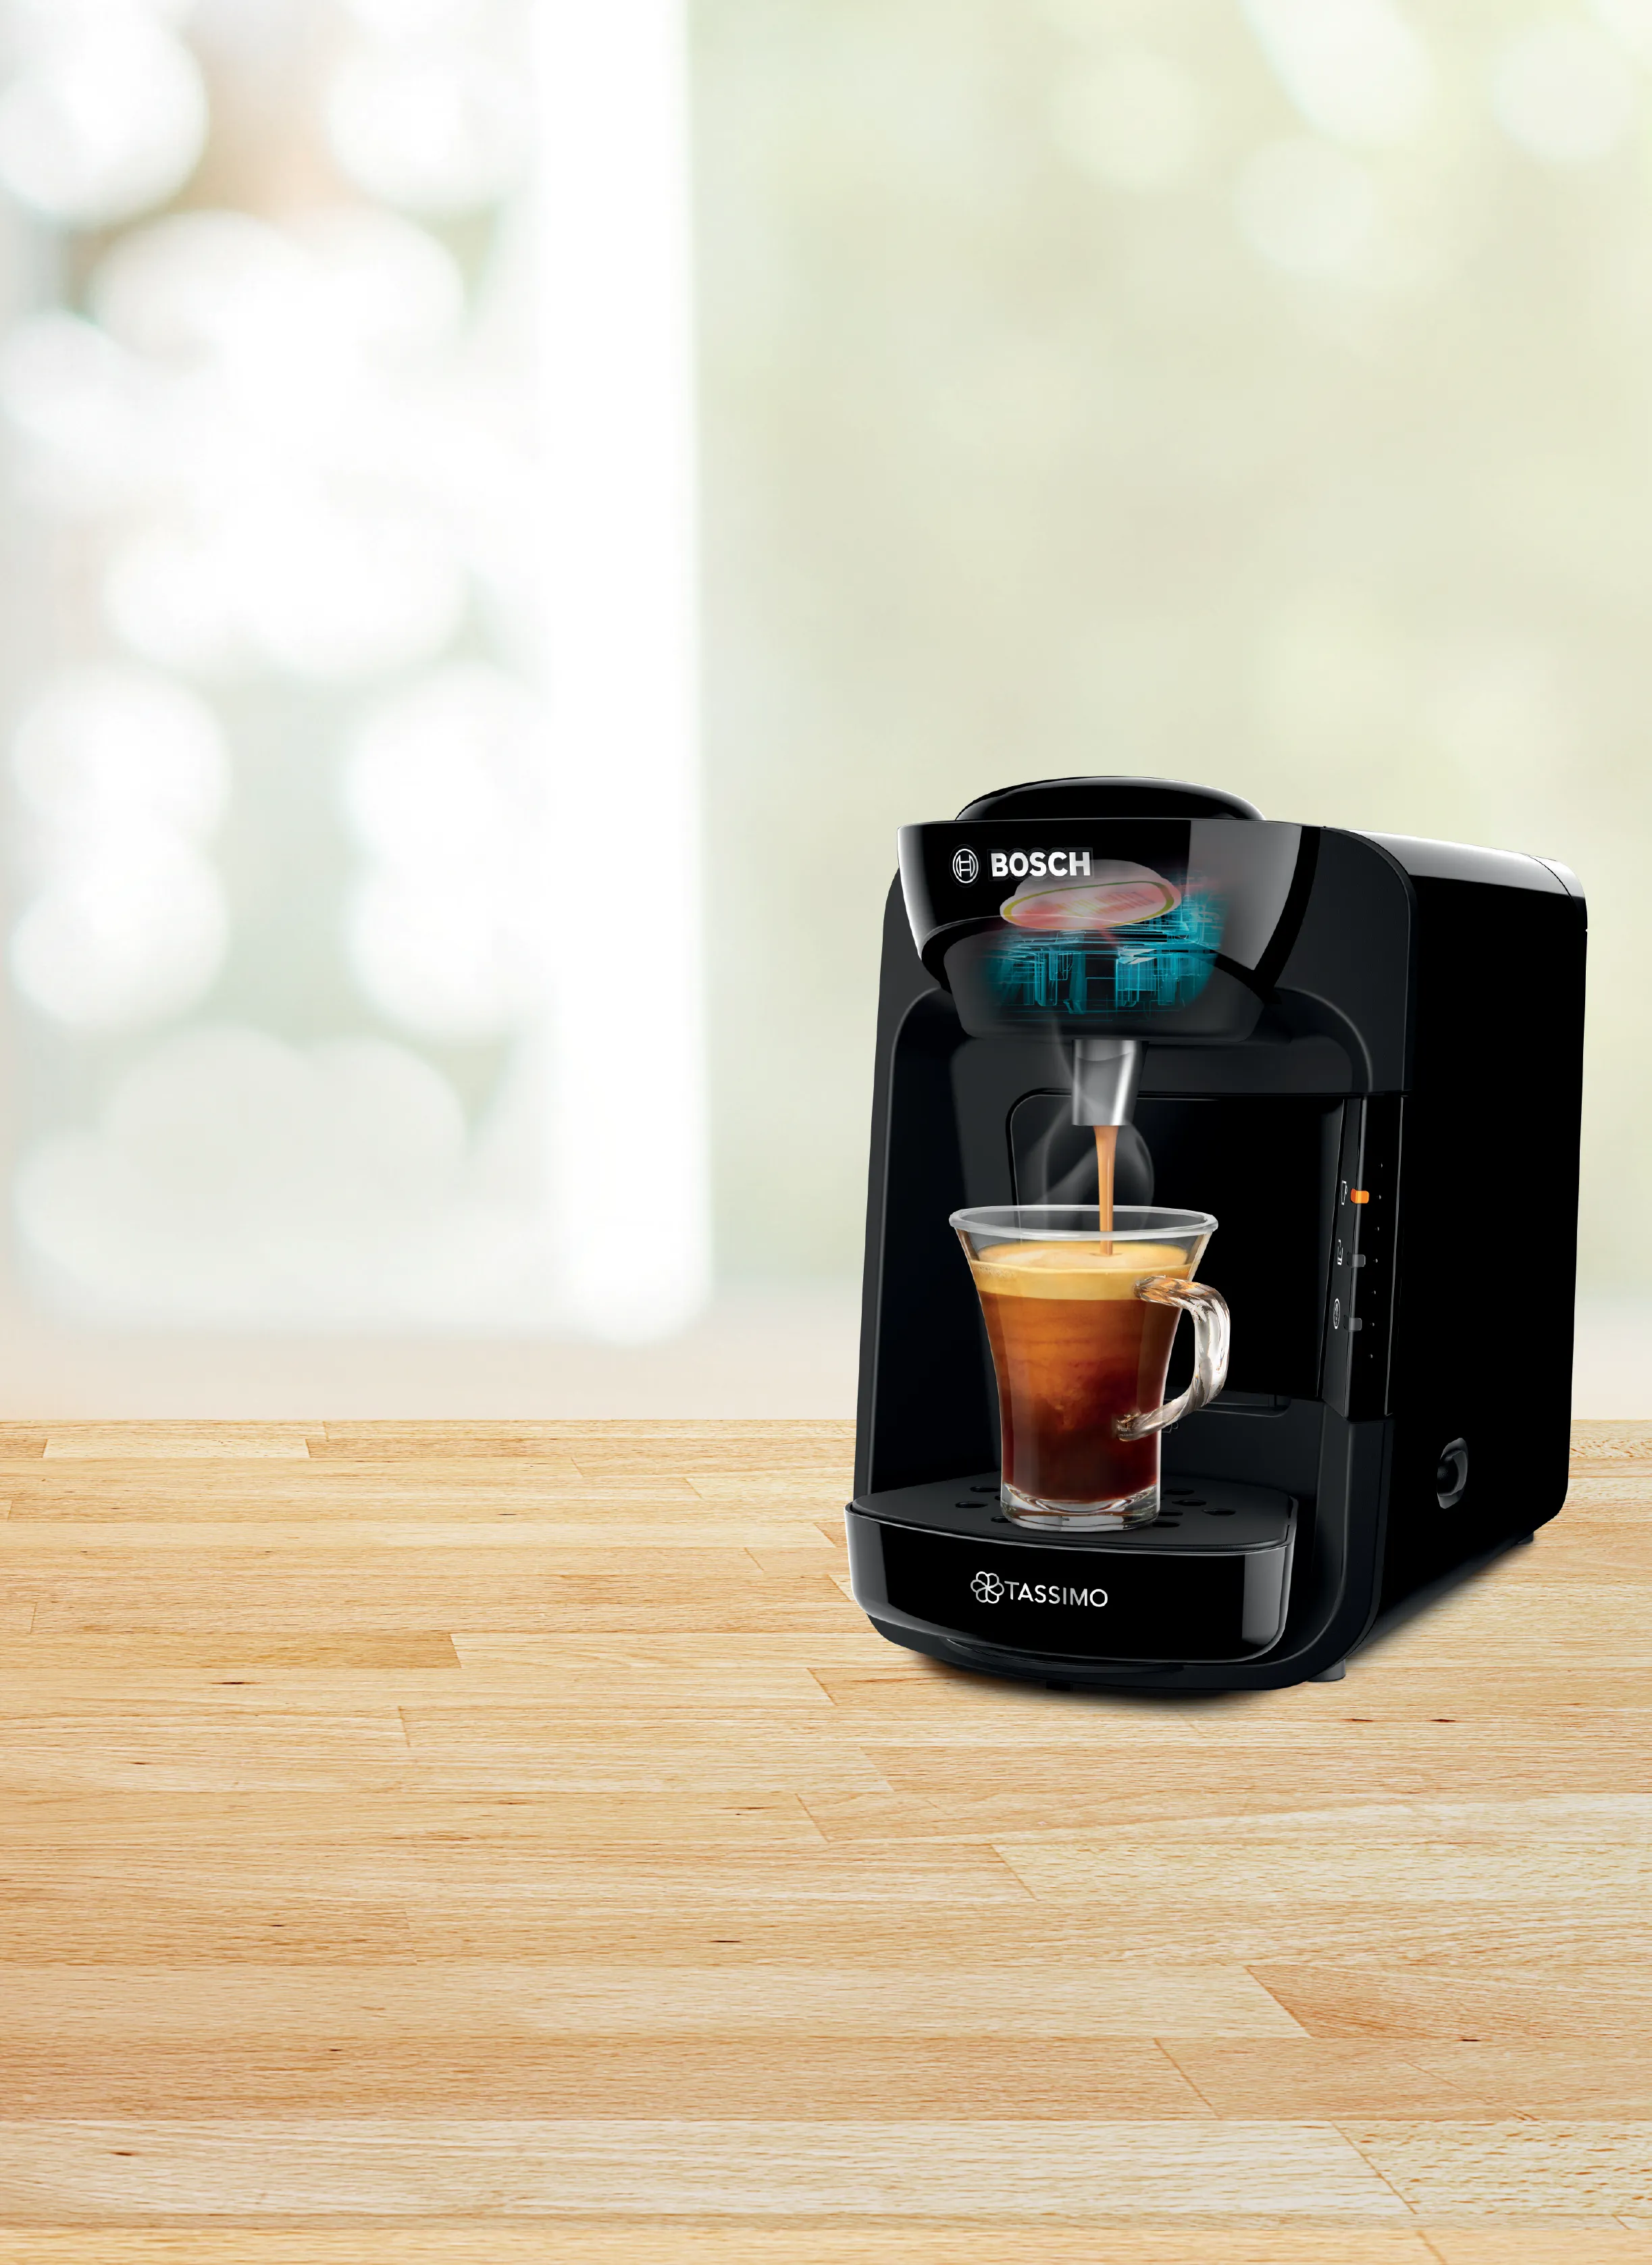 TASSIMO SUNY - How to descale your machine 